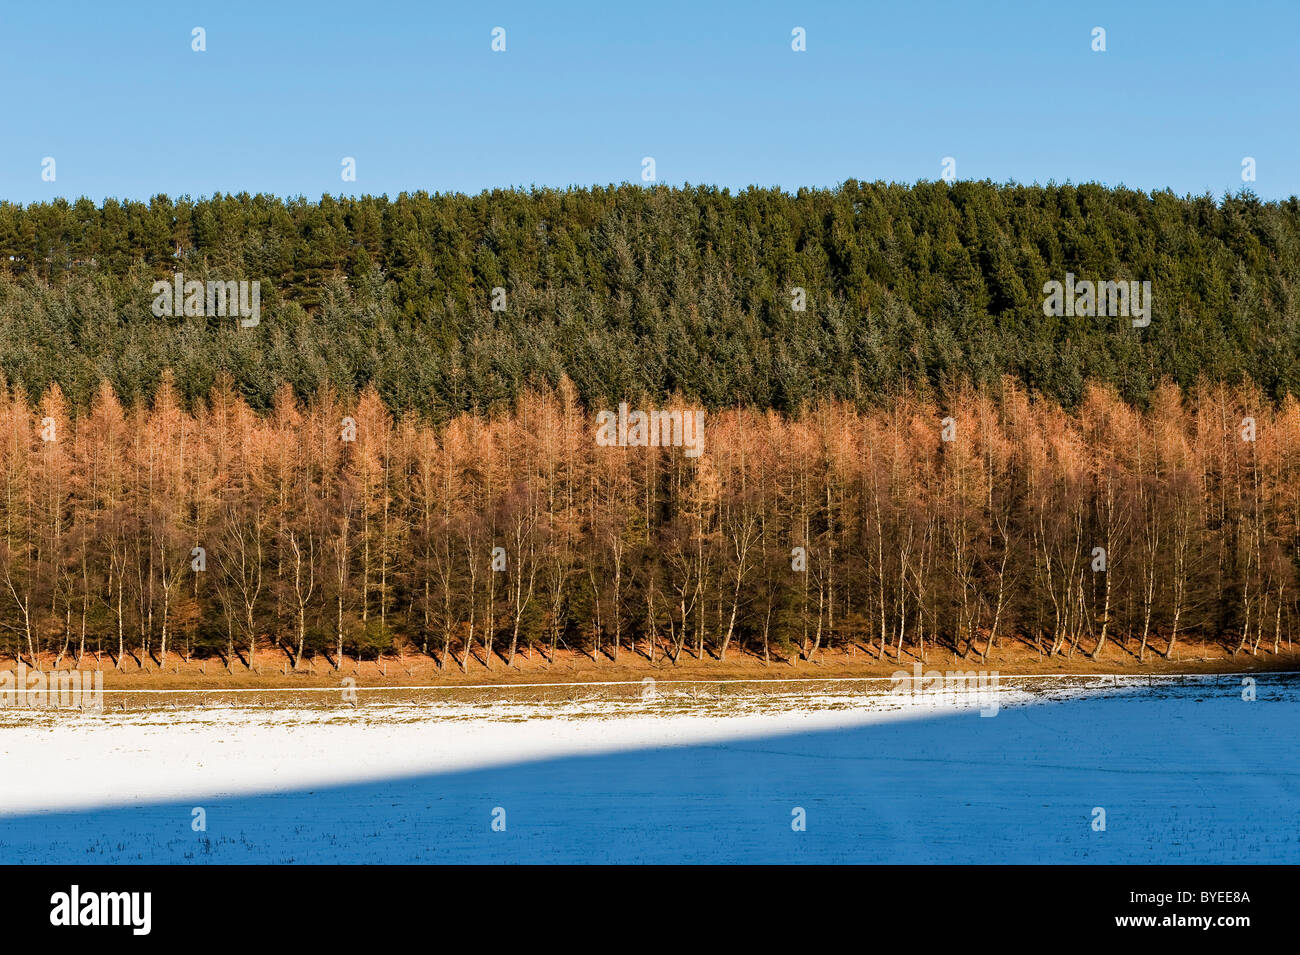 Woodland in mid-Wales in winter. Larches and conifers in sunshine, with a snowy field in the foreground Stock Photo